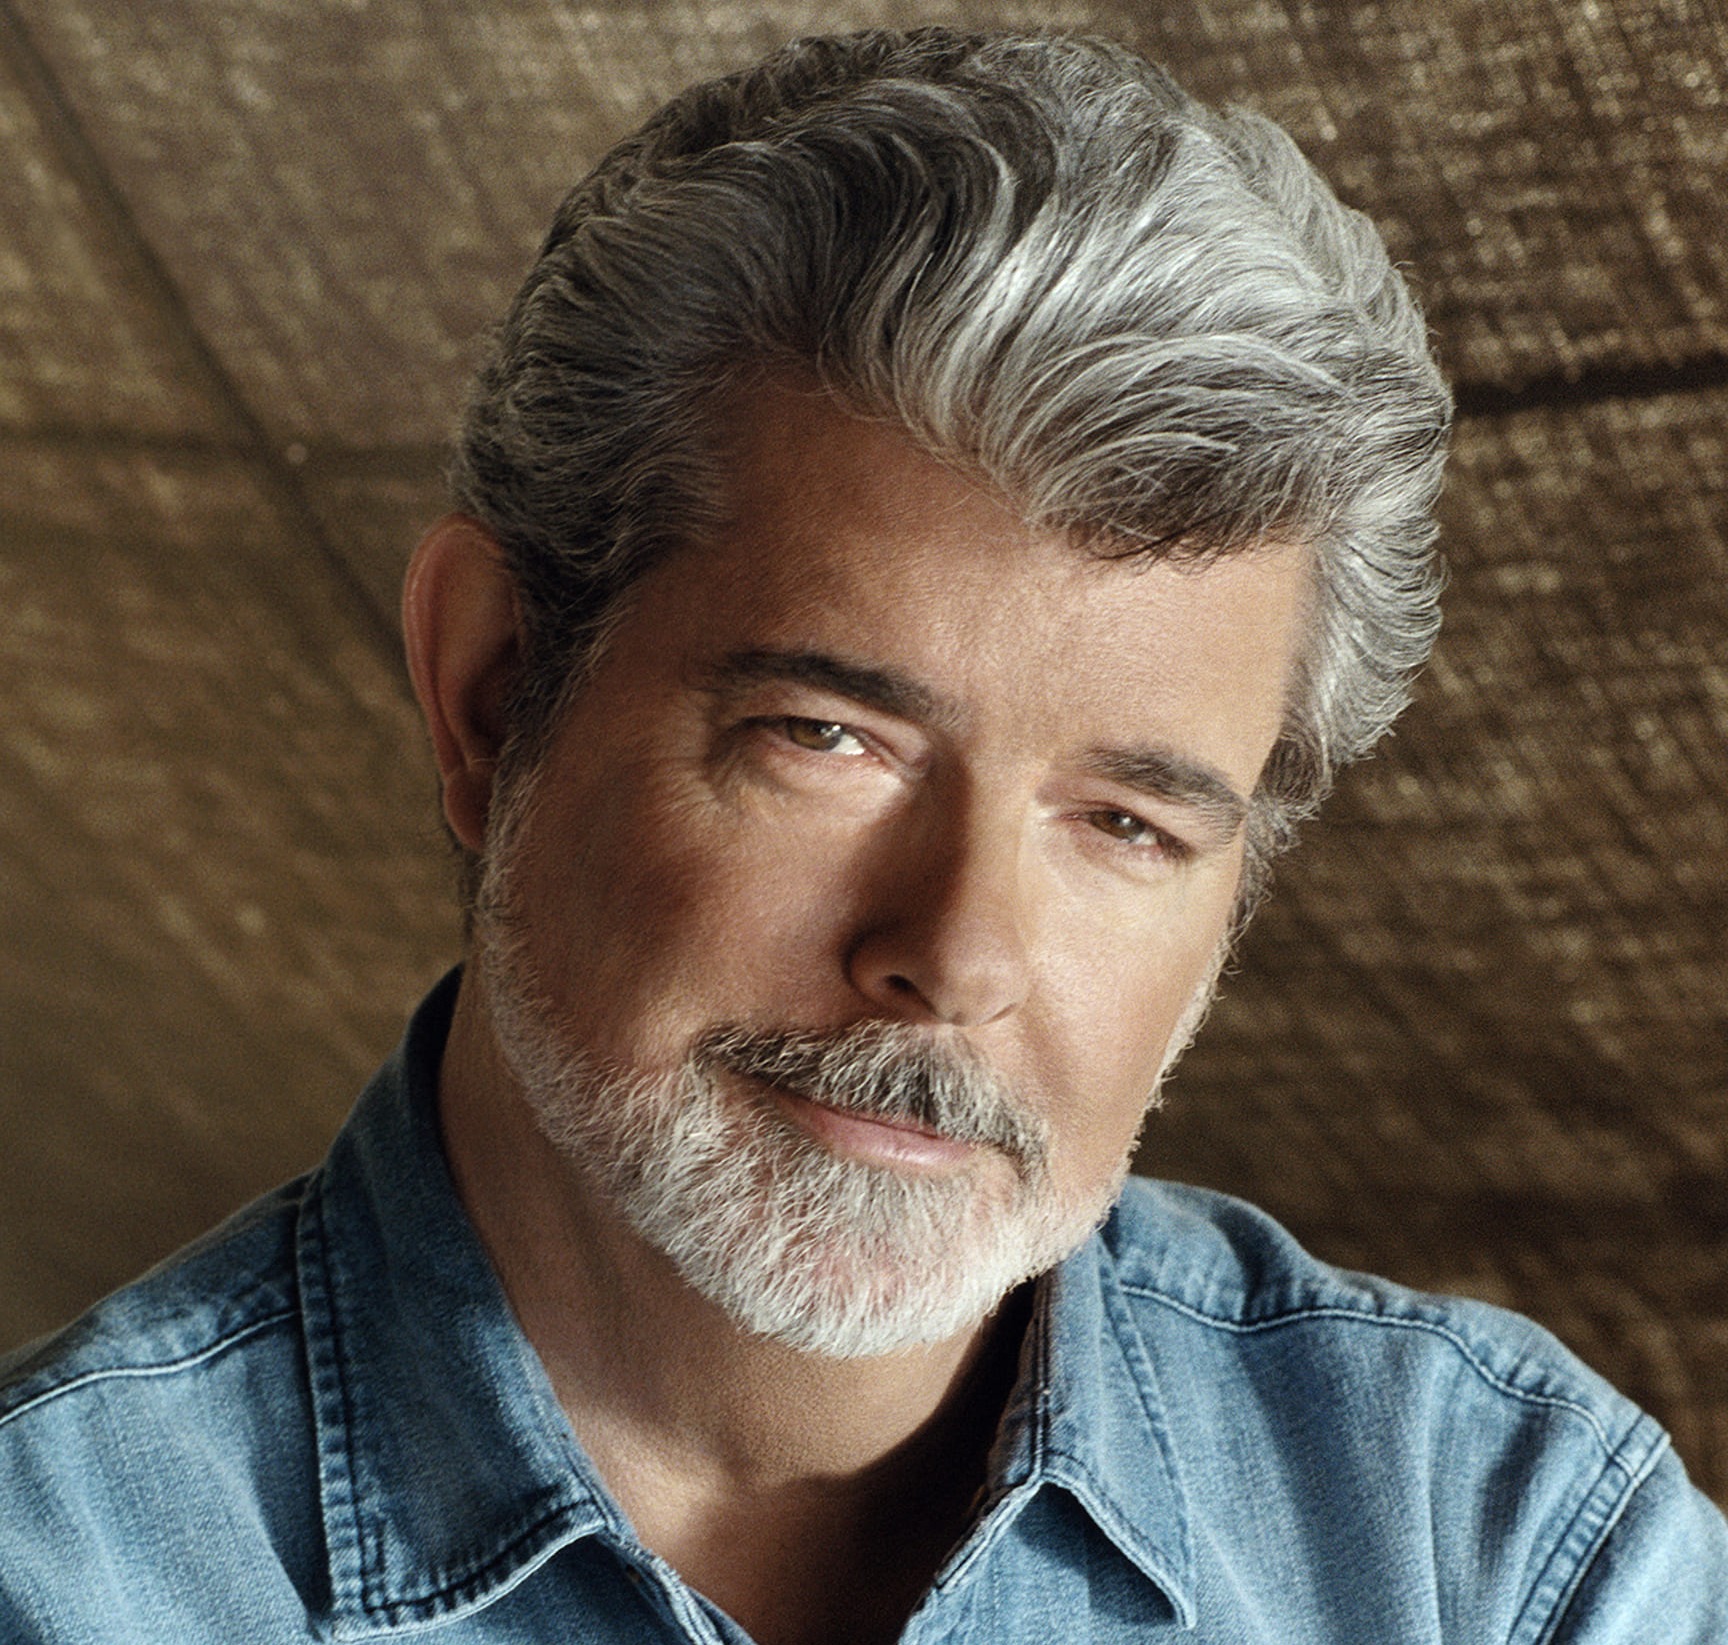 George Lucas Honorary Palme d'or of the 77th Festival de Cannes